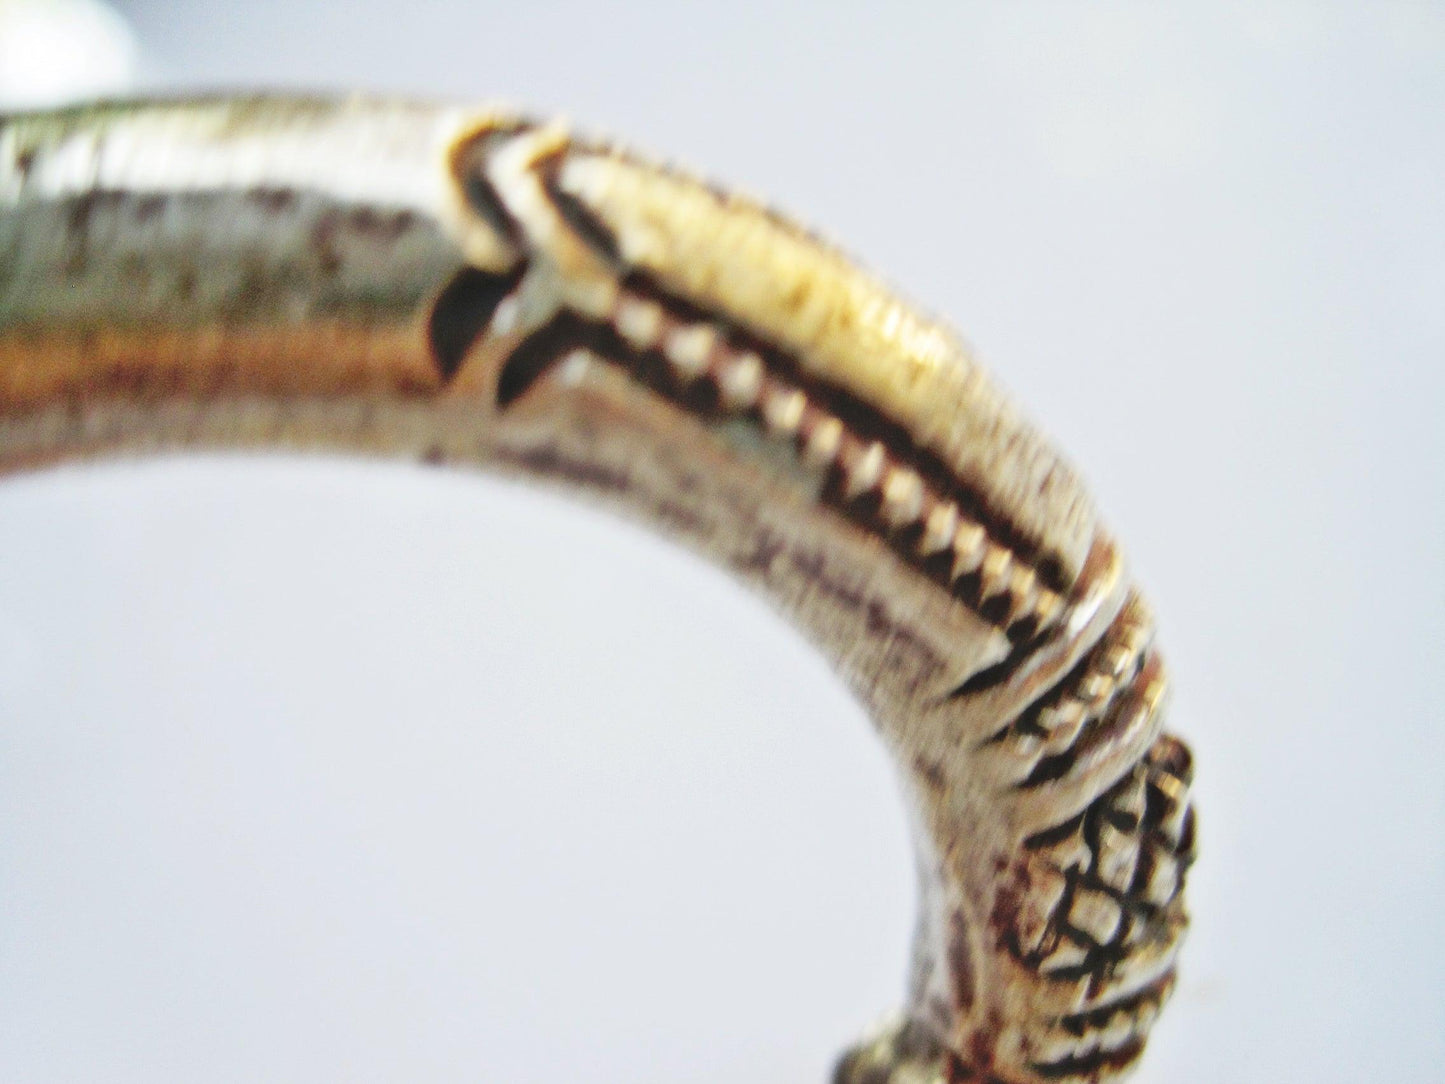 Vintage Solid Bedouin Cuff with Stylized Snake Head Finials - Anteeka